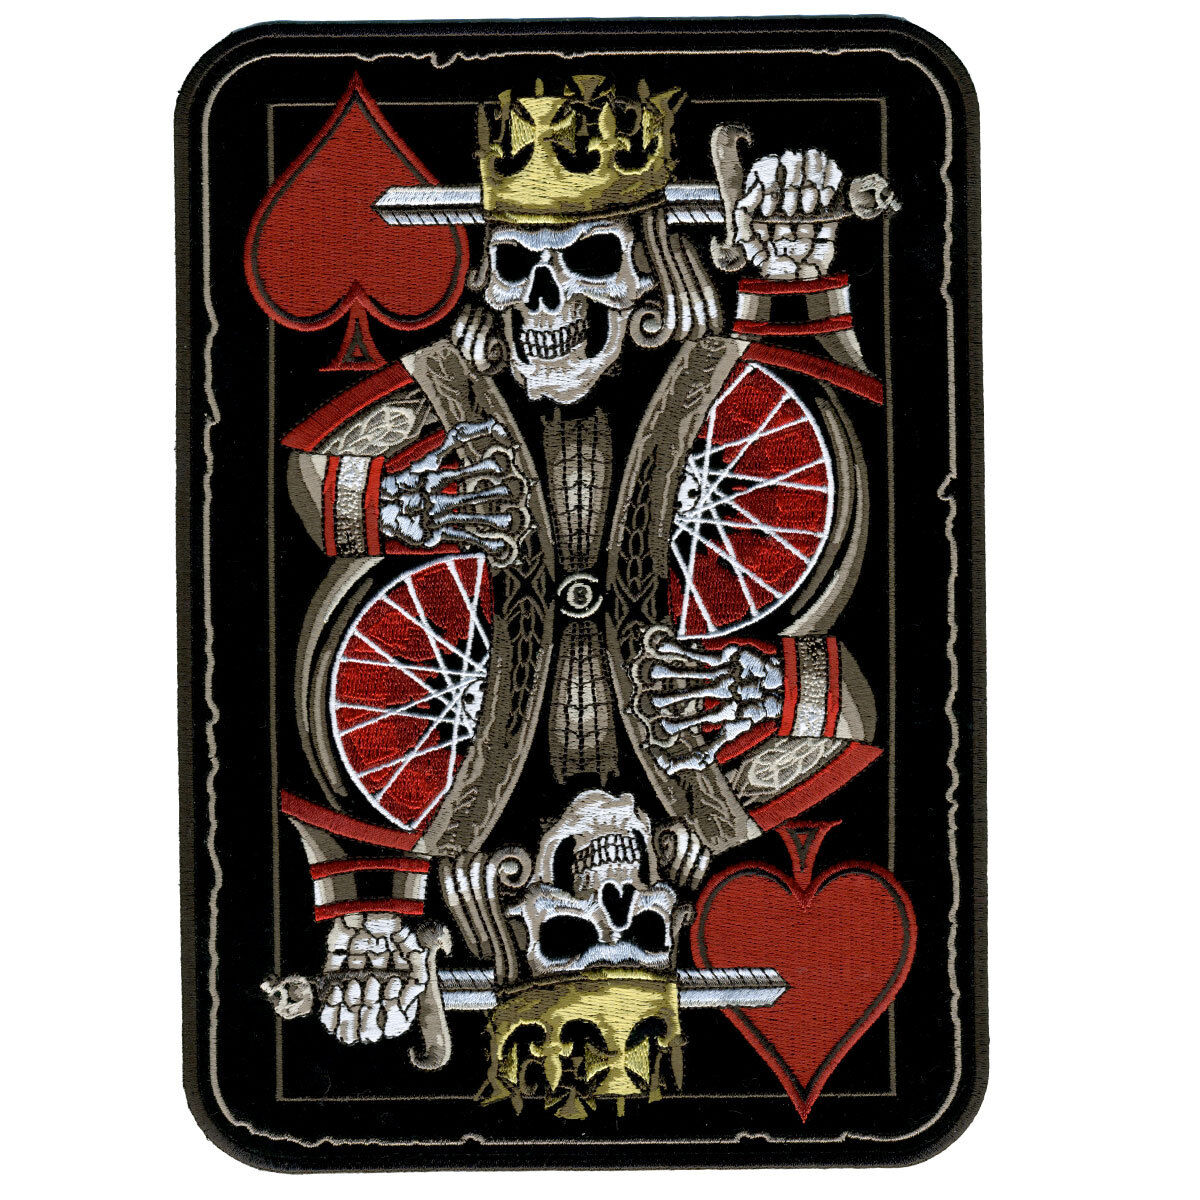 SUICIDE KING DEATH SKULL PLAYING CARD  4 INCH MC BIKER PATCH BY MILTACUSA